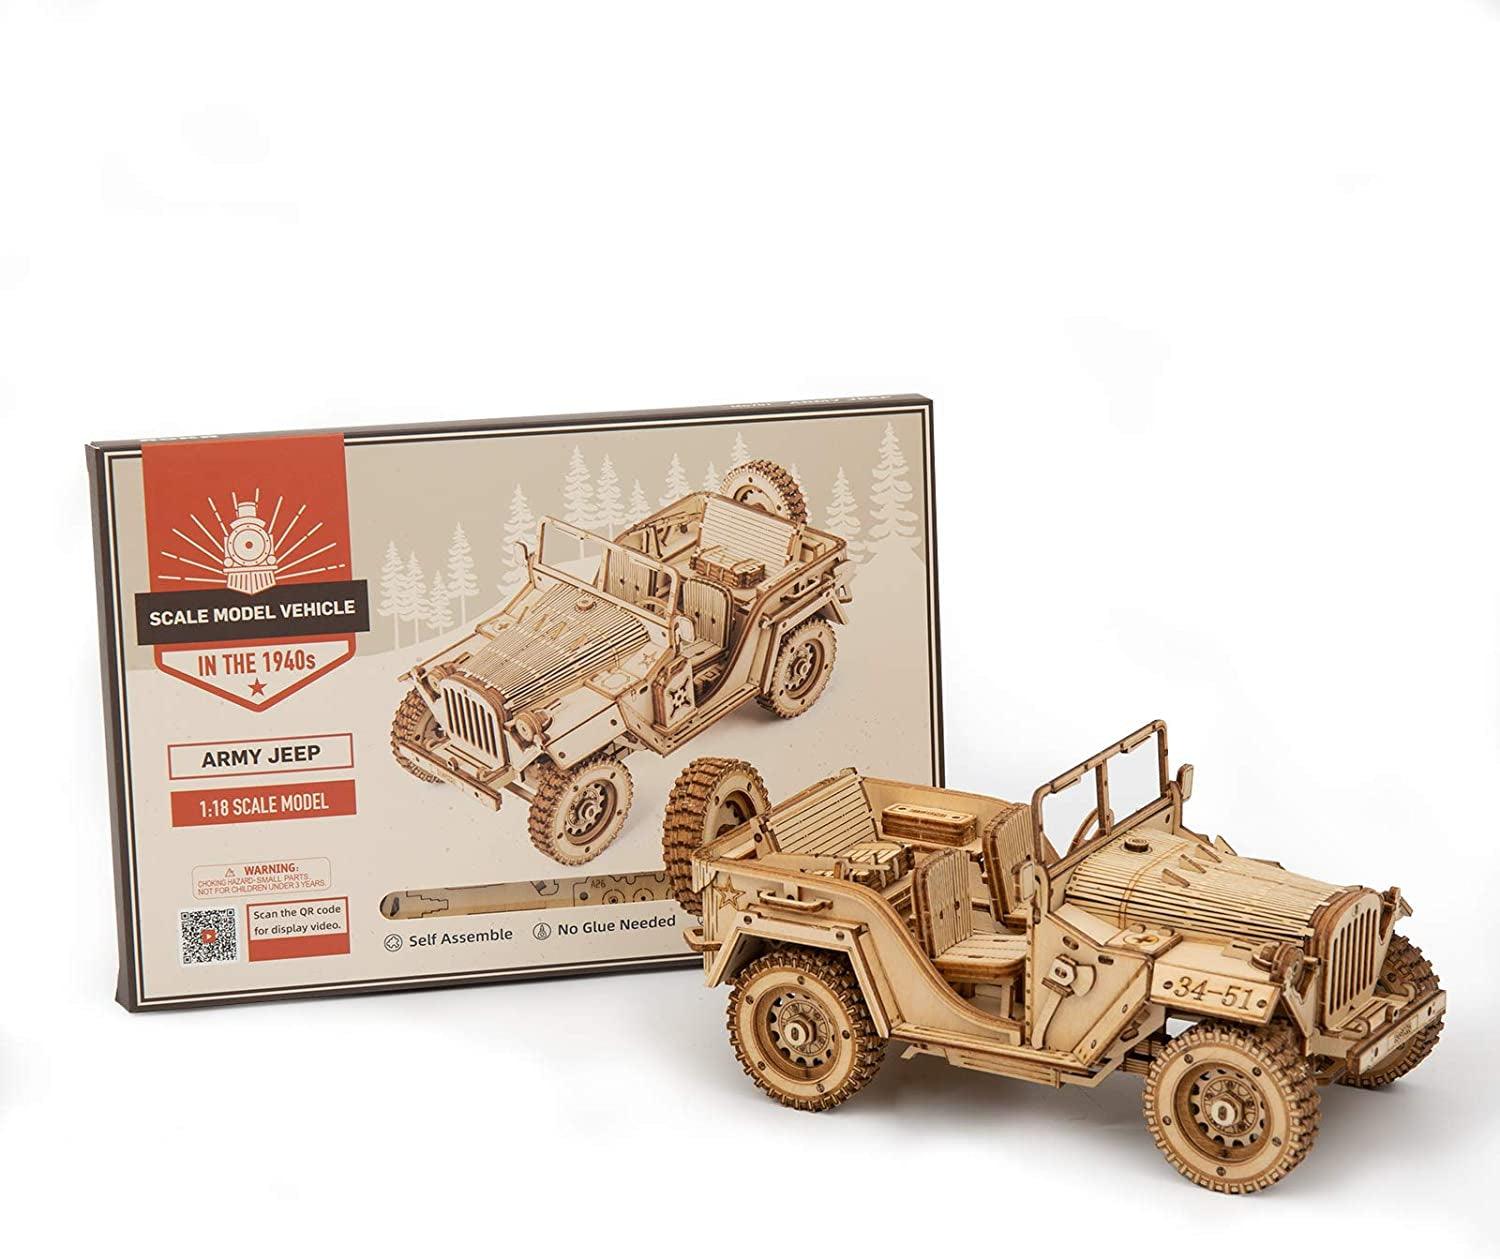 Car Model Kits 3D Puzzles for Adults and Teens DIY Wooden Crafts No Batteries 1:18 Scale Model - WoodArtSupply